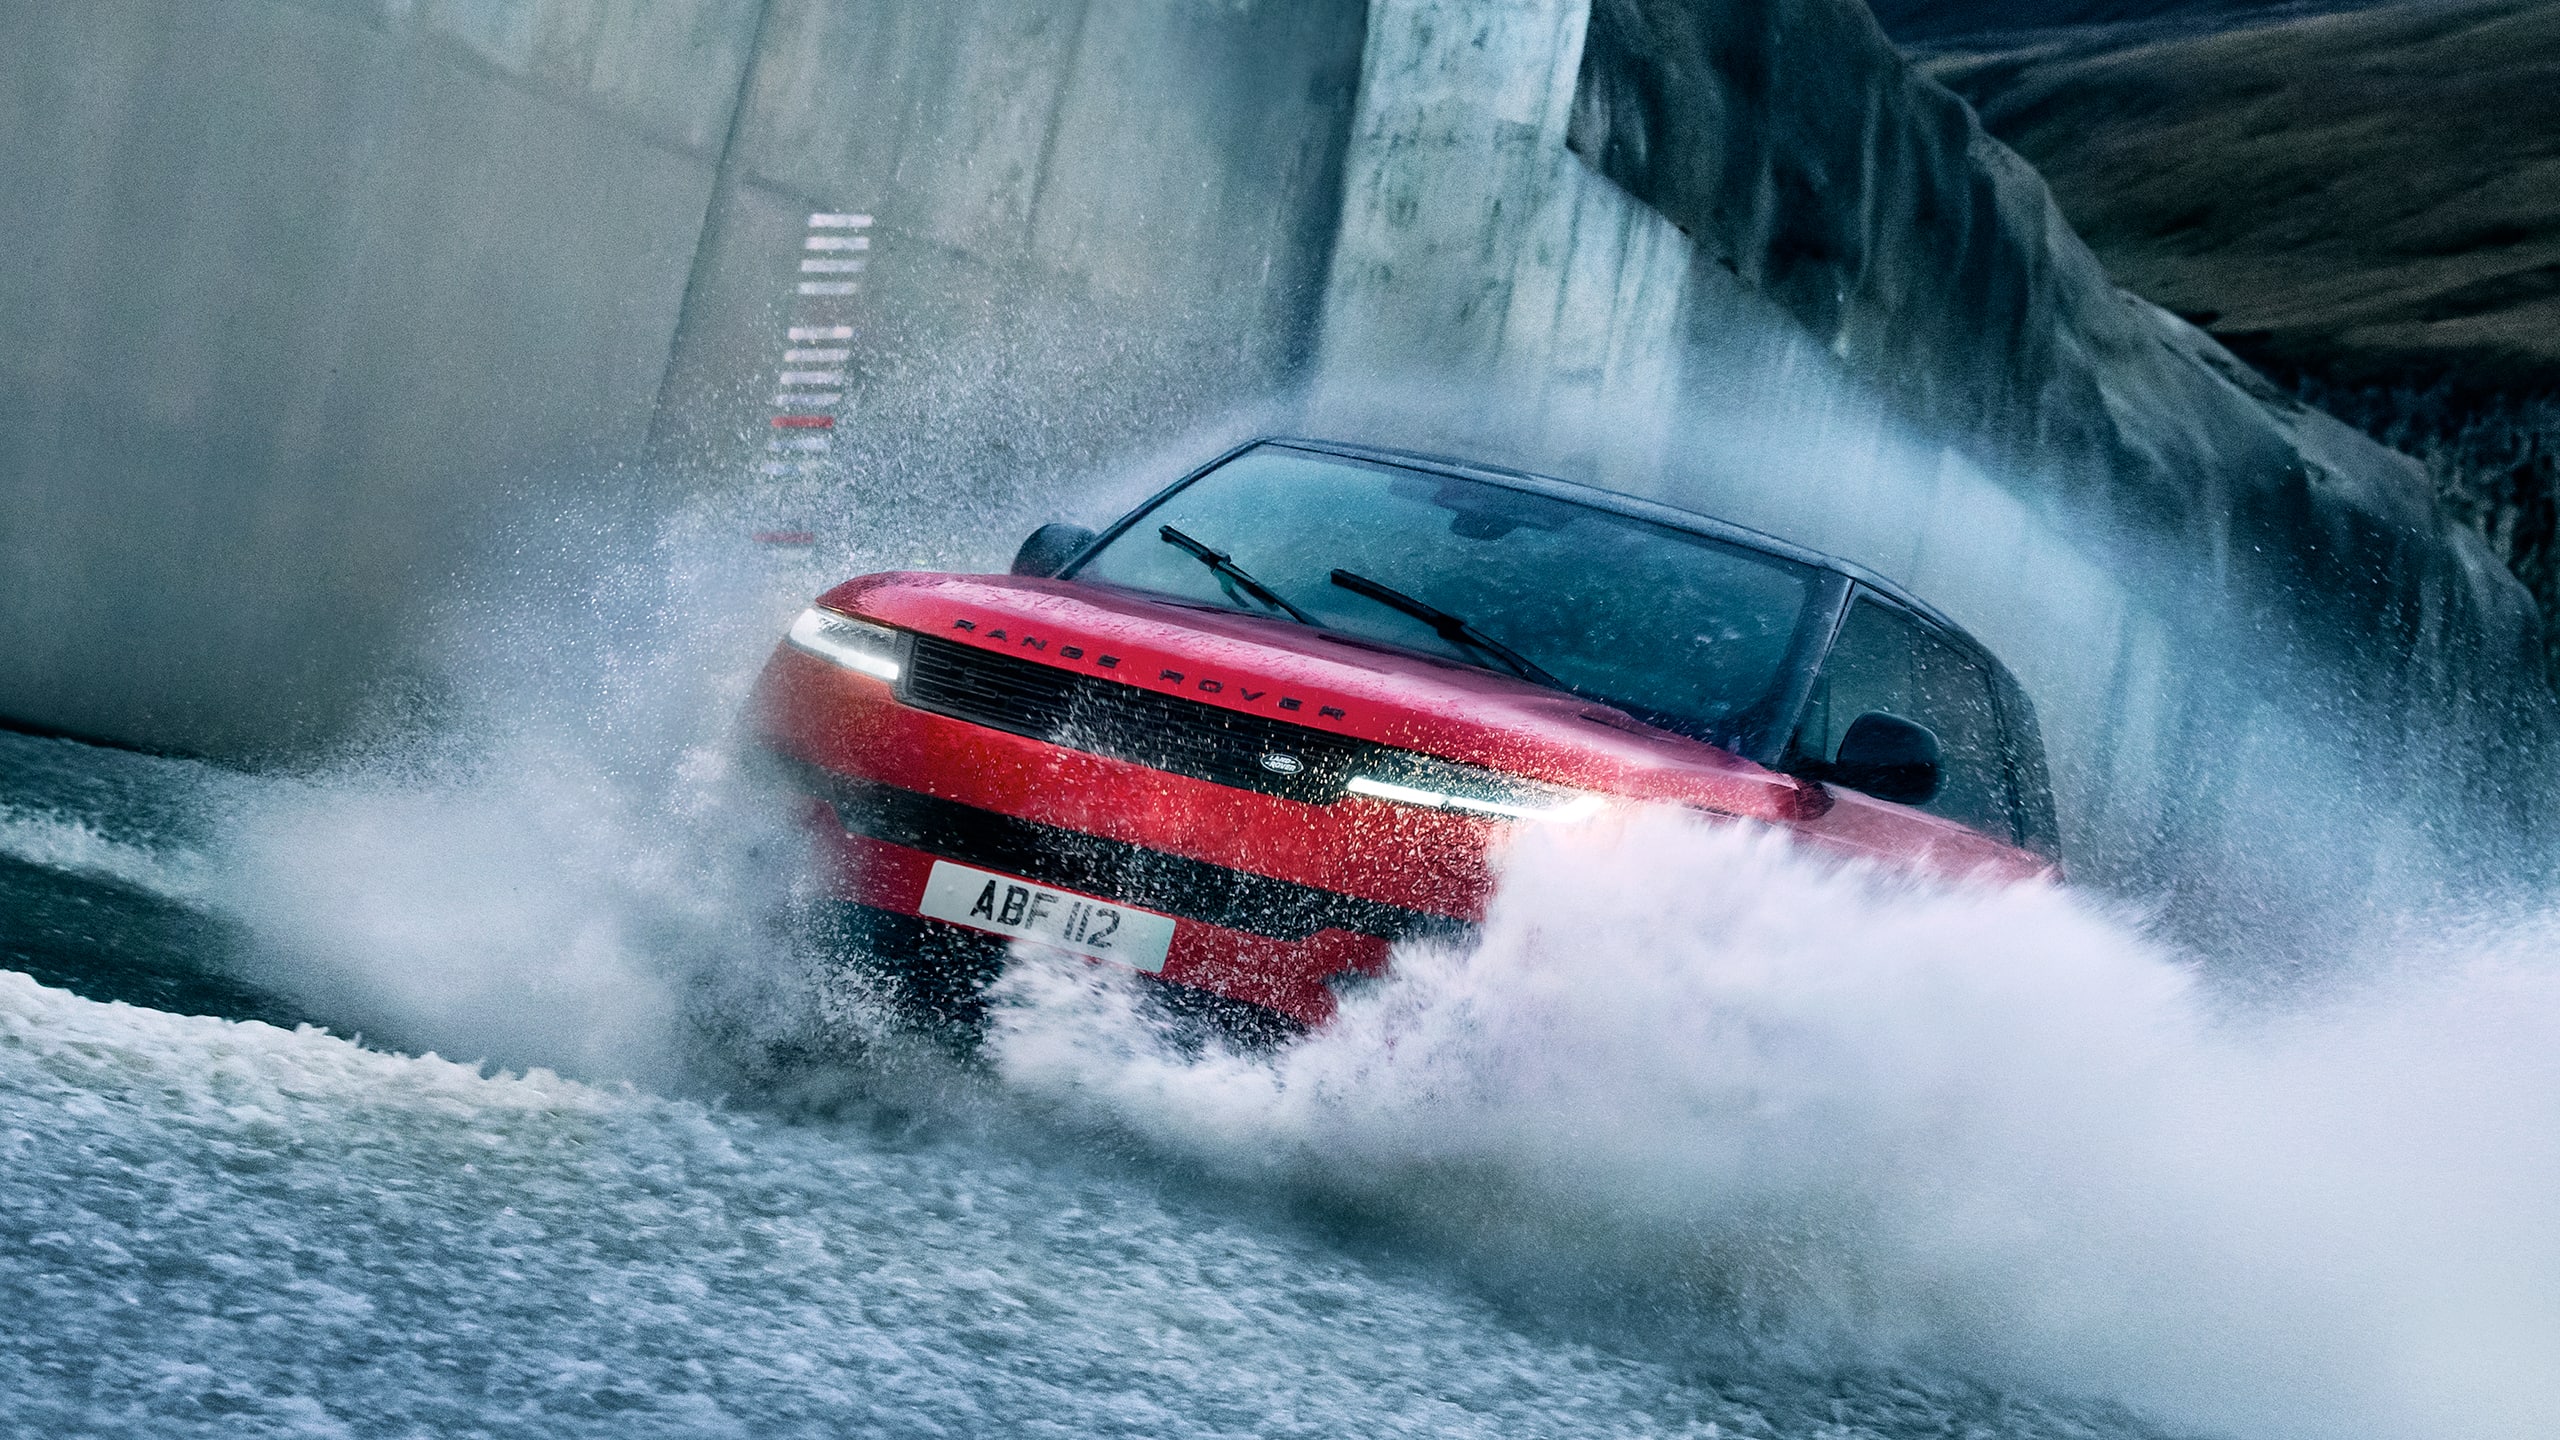 Range Rover Sport driving quickly through water on a flooded road